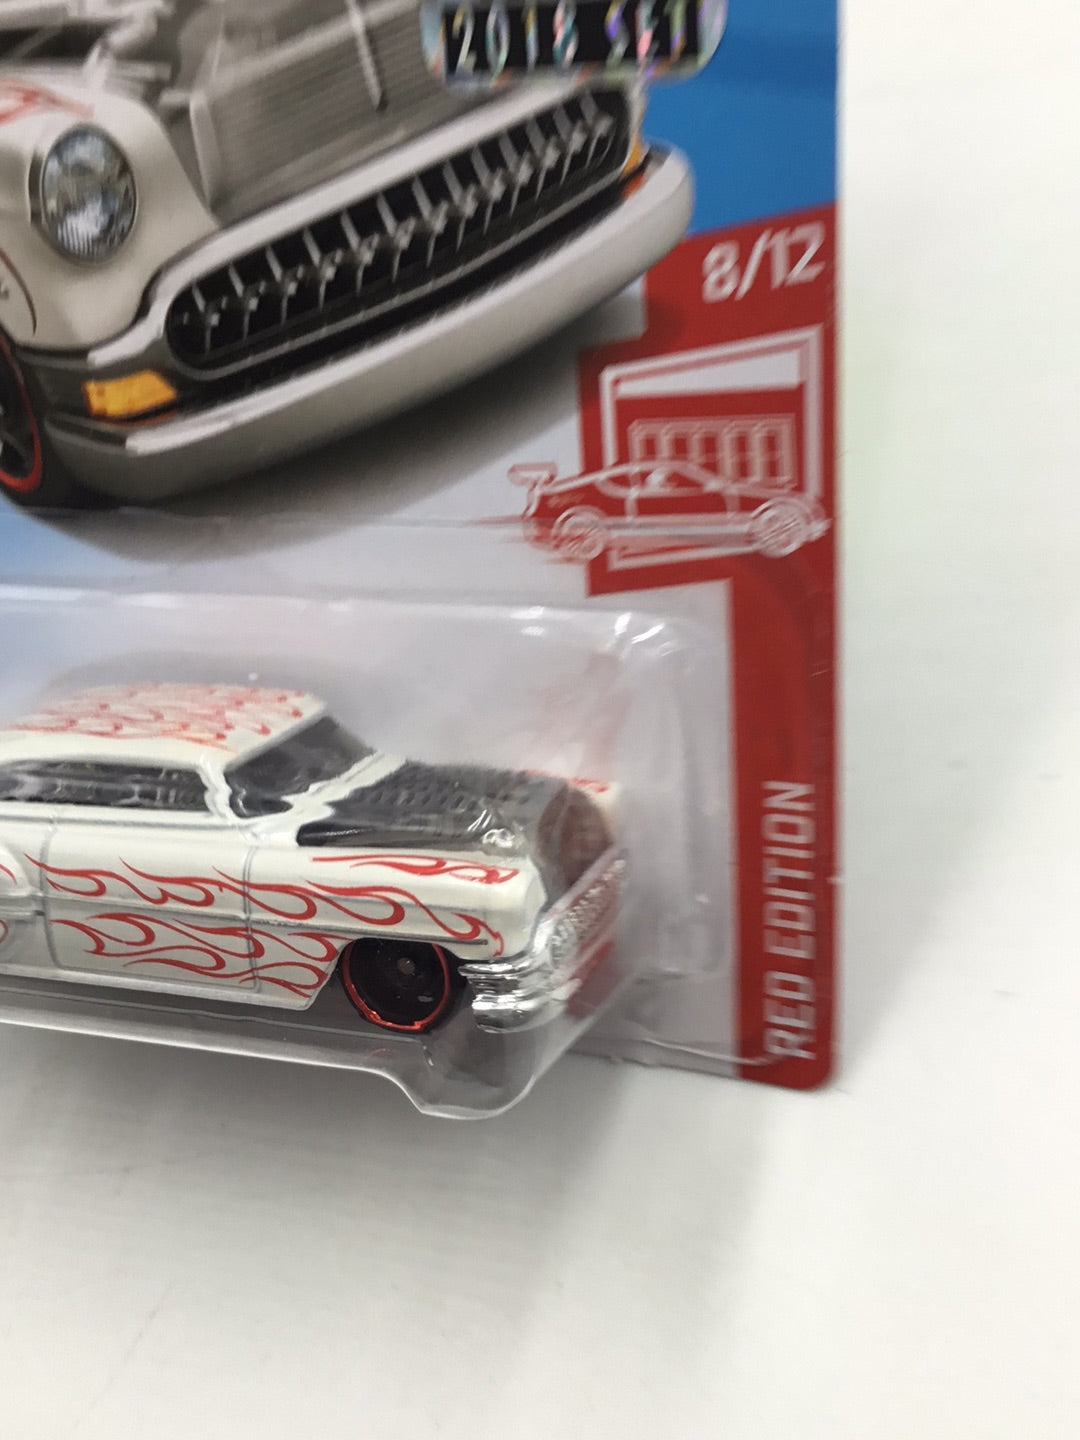 2018 hot wheels red edition #8 Custom 53 Chevy target red factory sealed sticker 150B